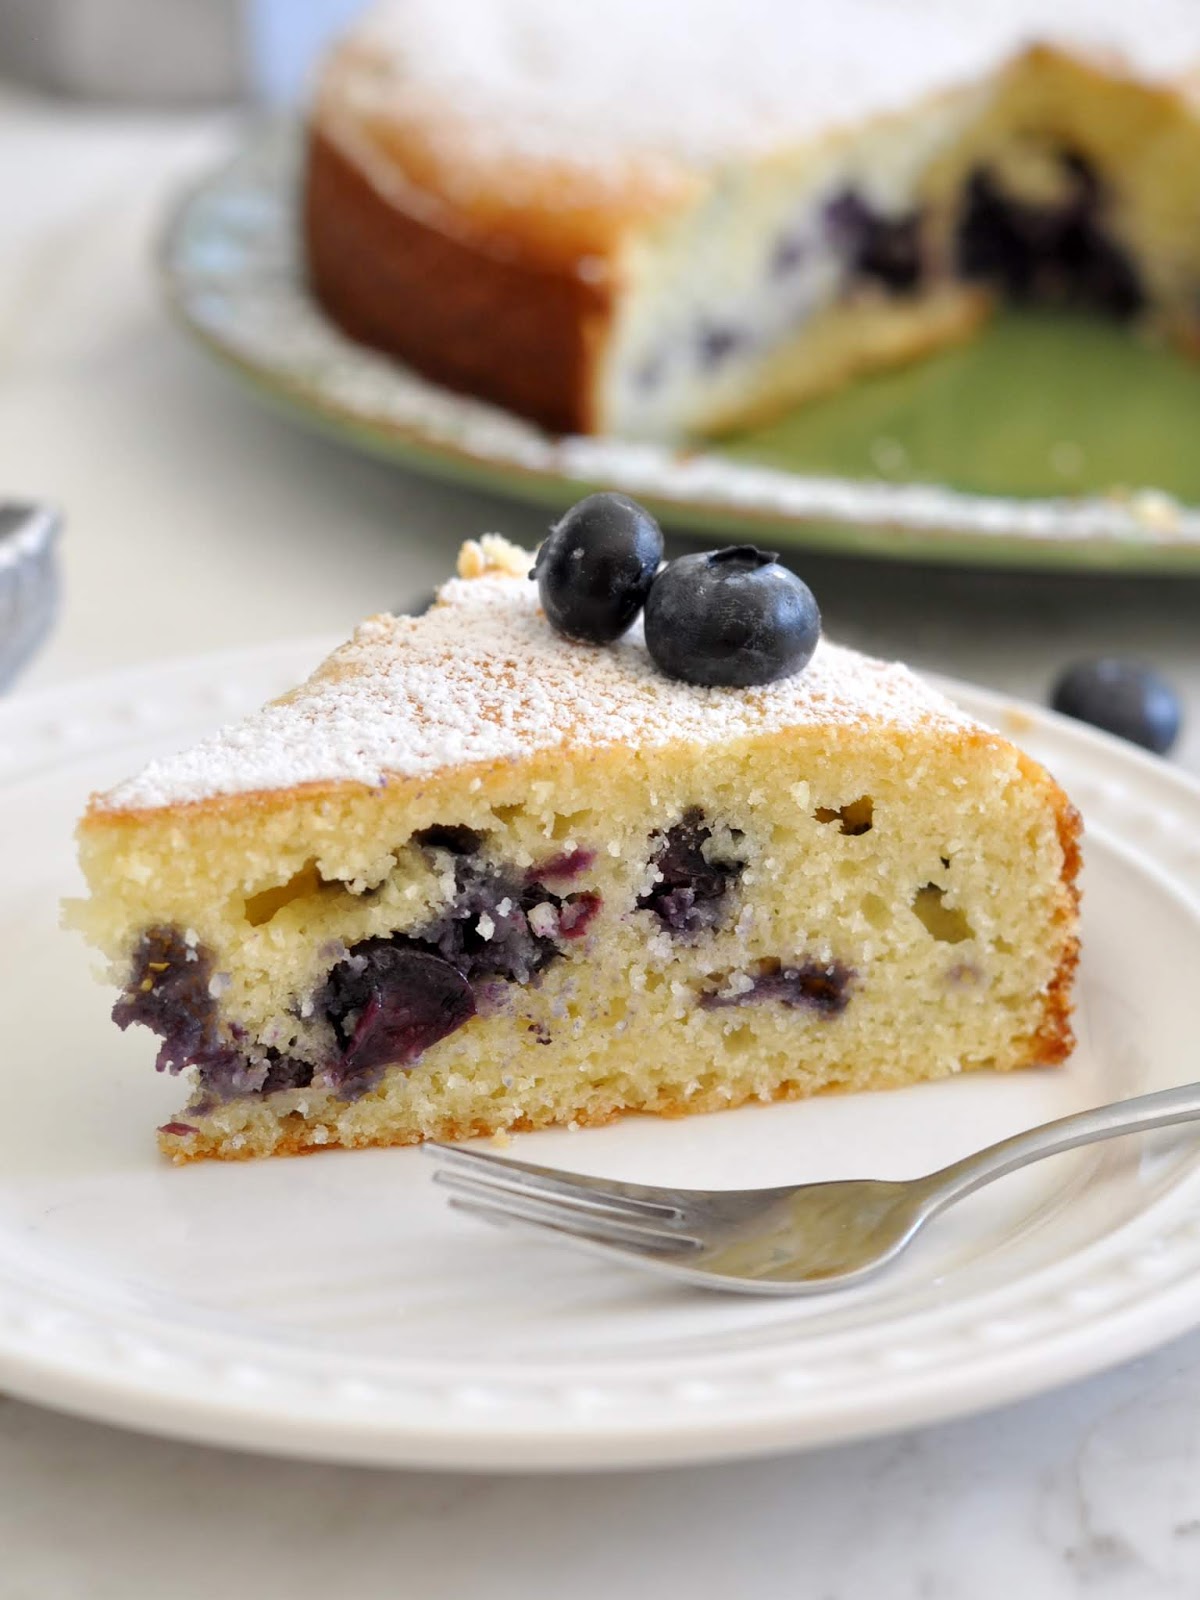 Cooking with Manuela: Ricotta and Blueberry Cake Ready in Just One Hour